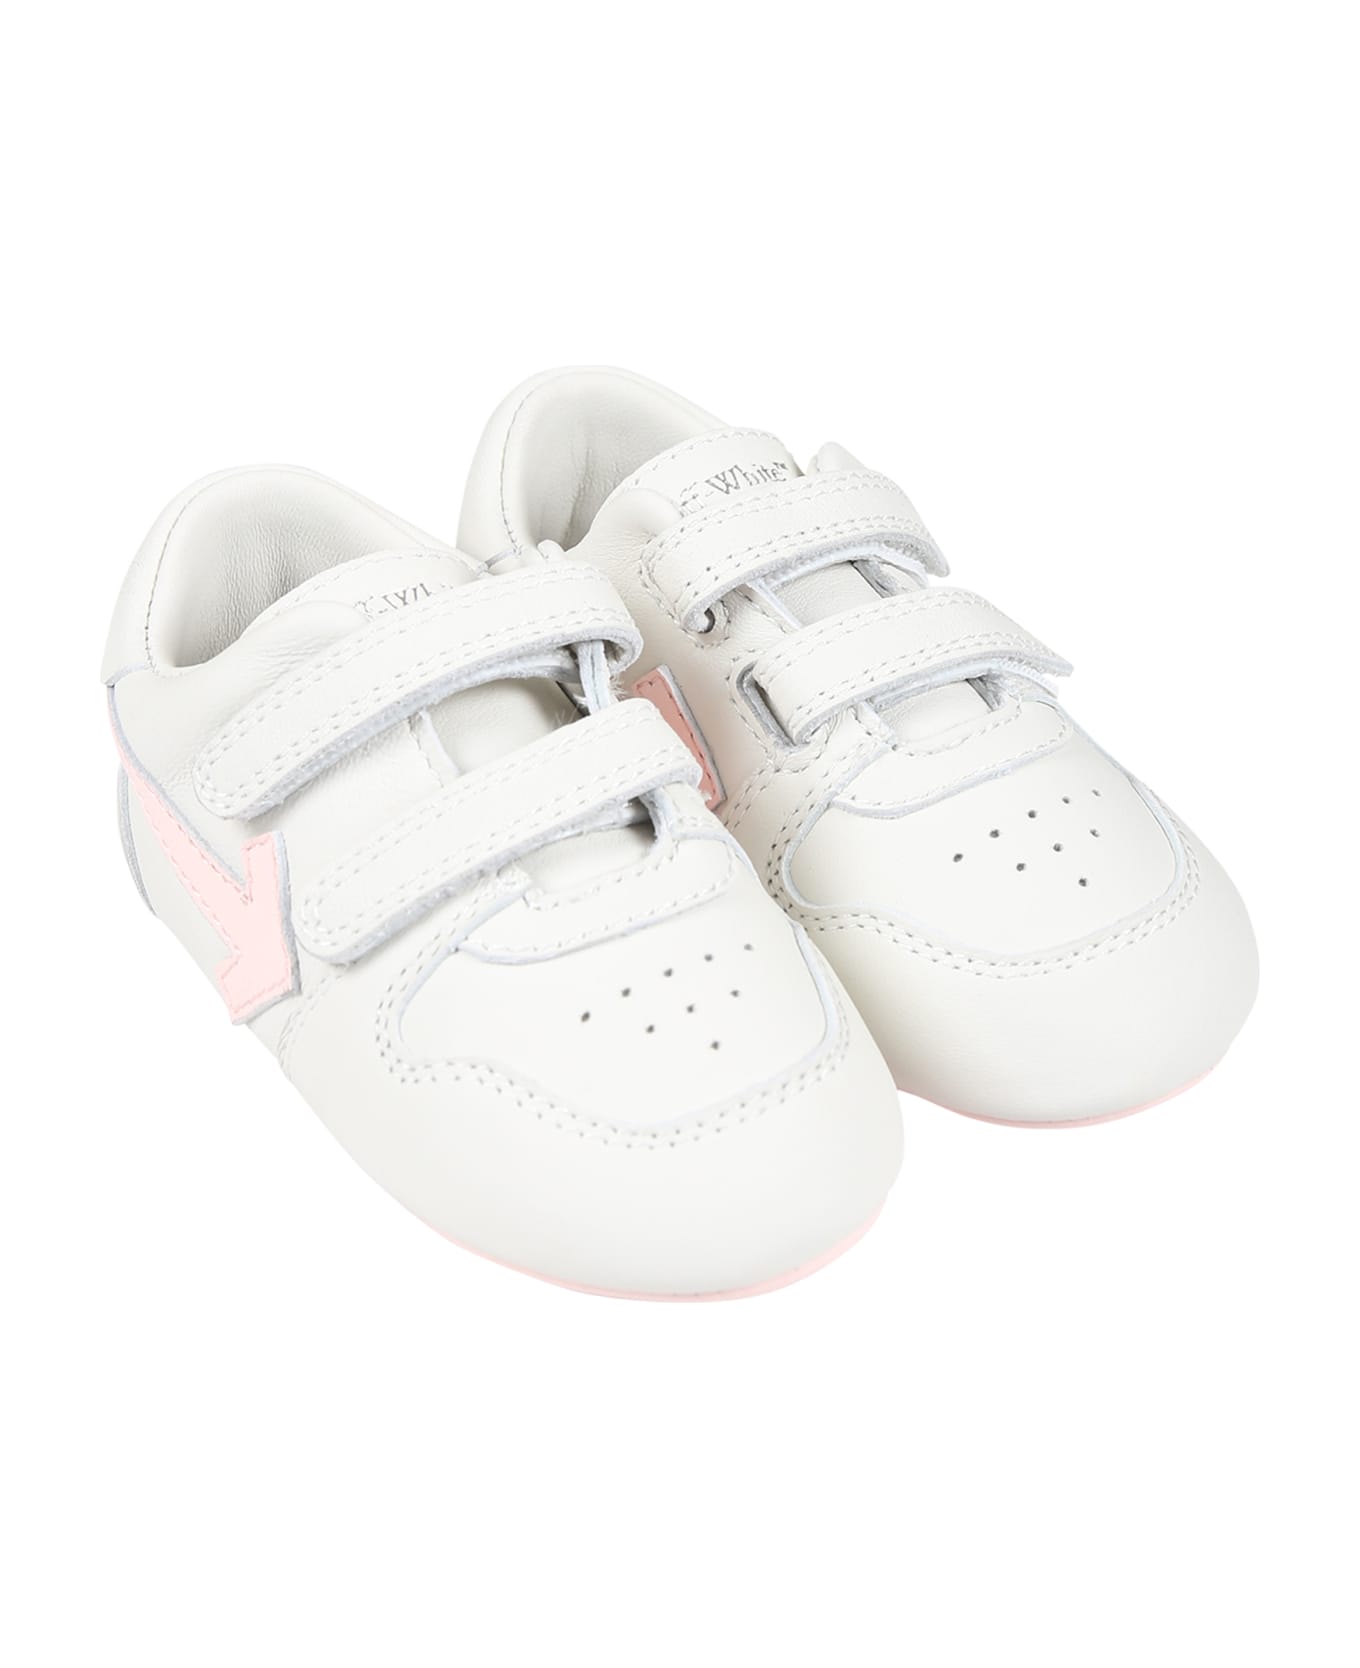 Off-White Grey Sneaker For Baby Girl With Arrows - White シューズ